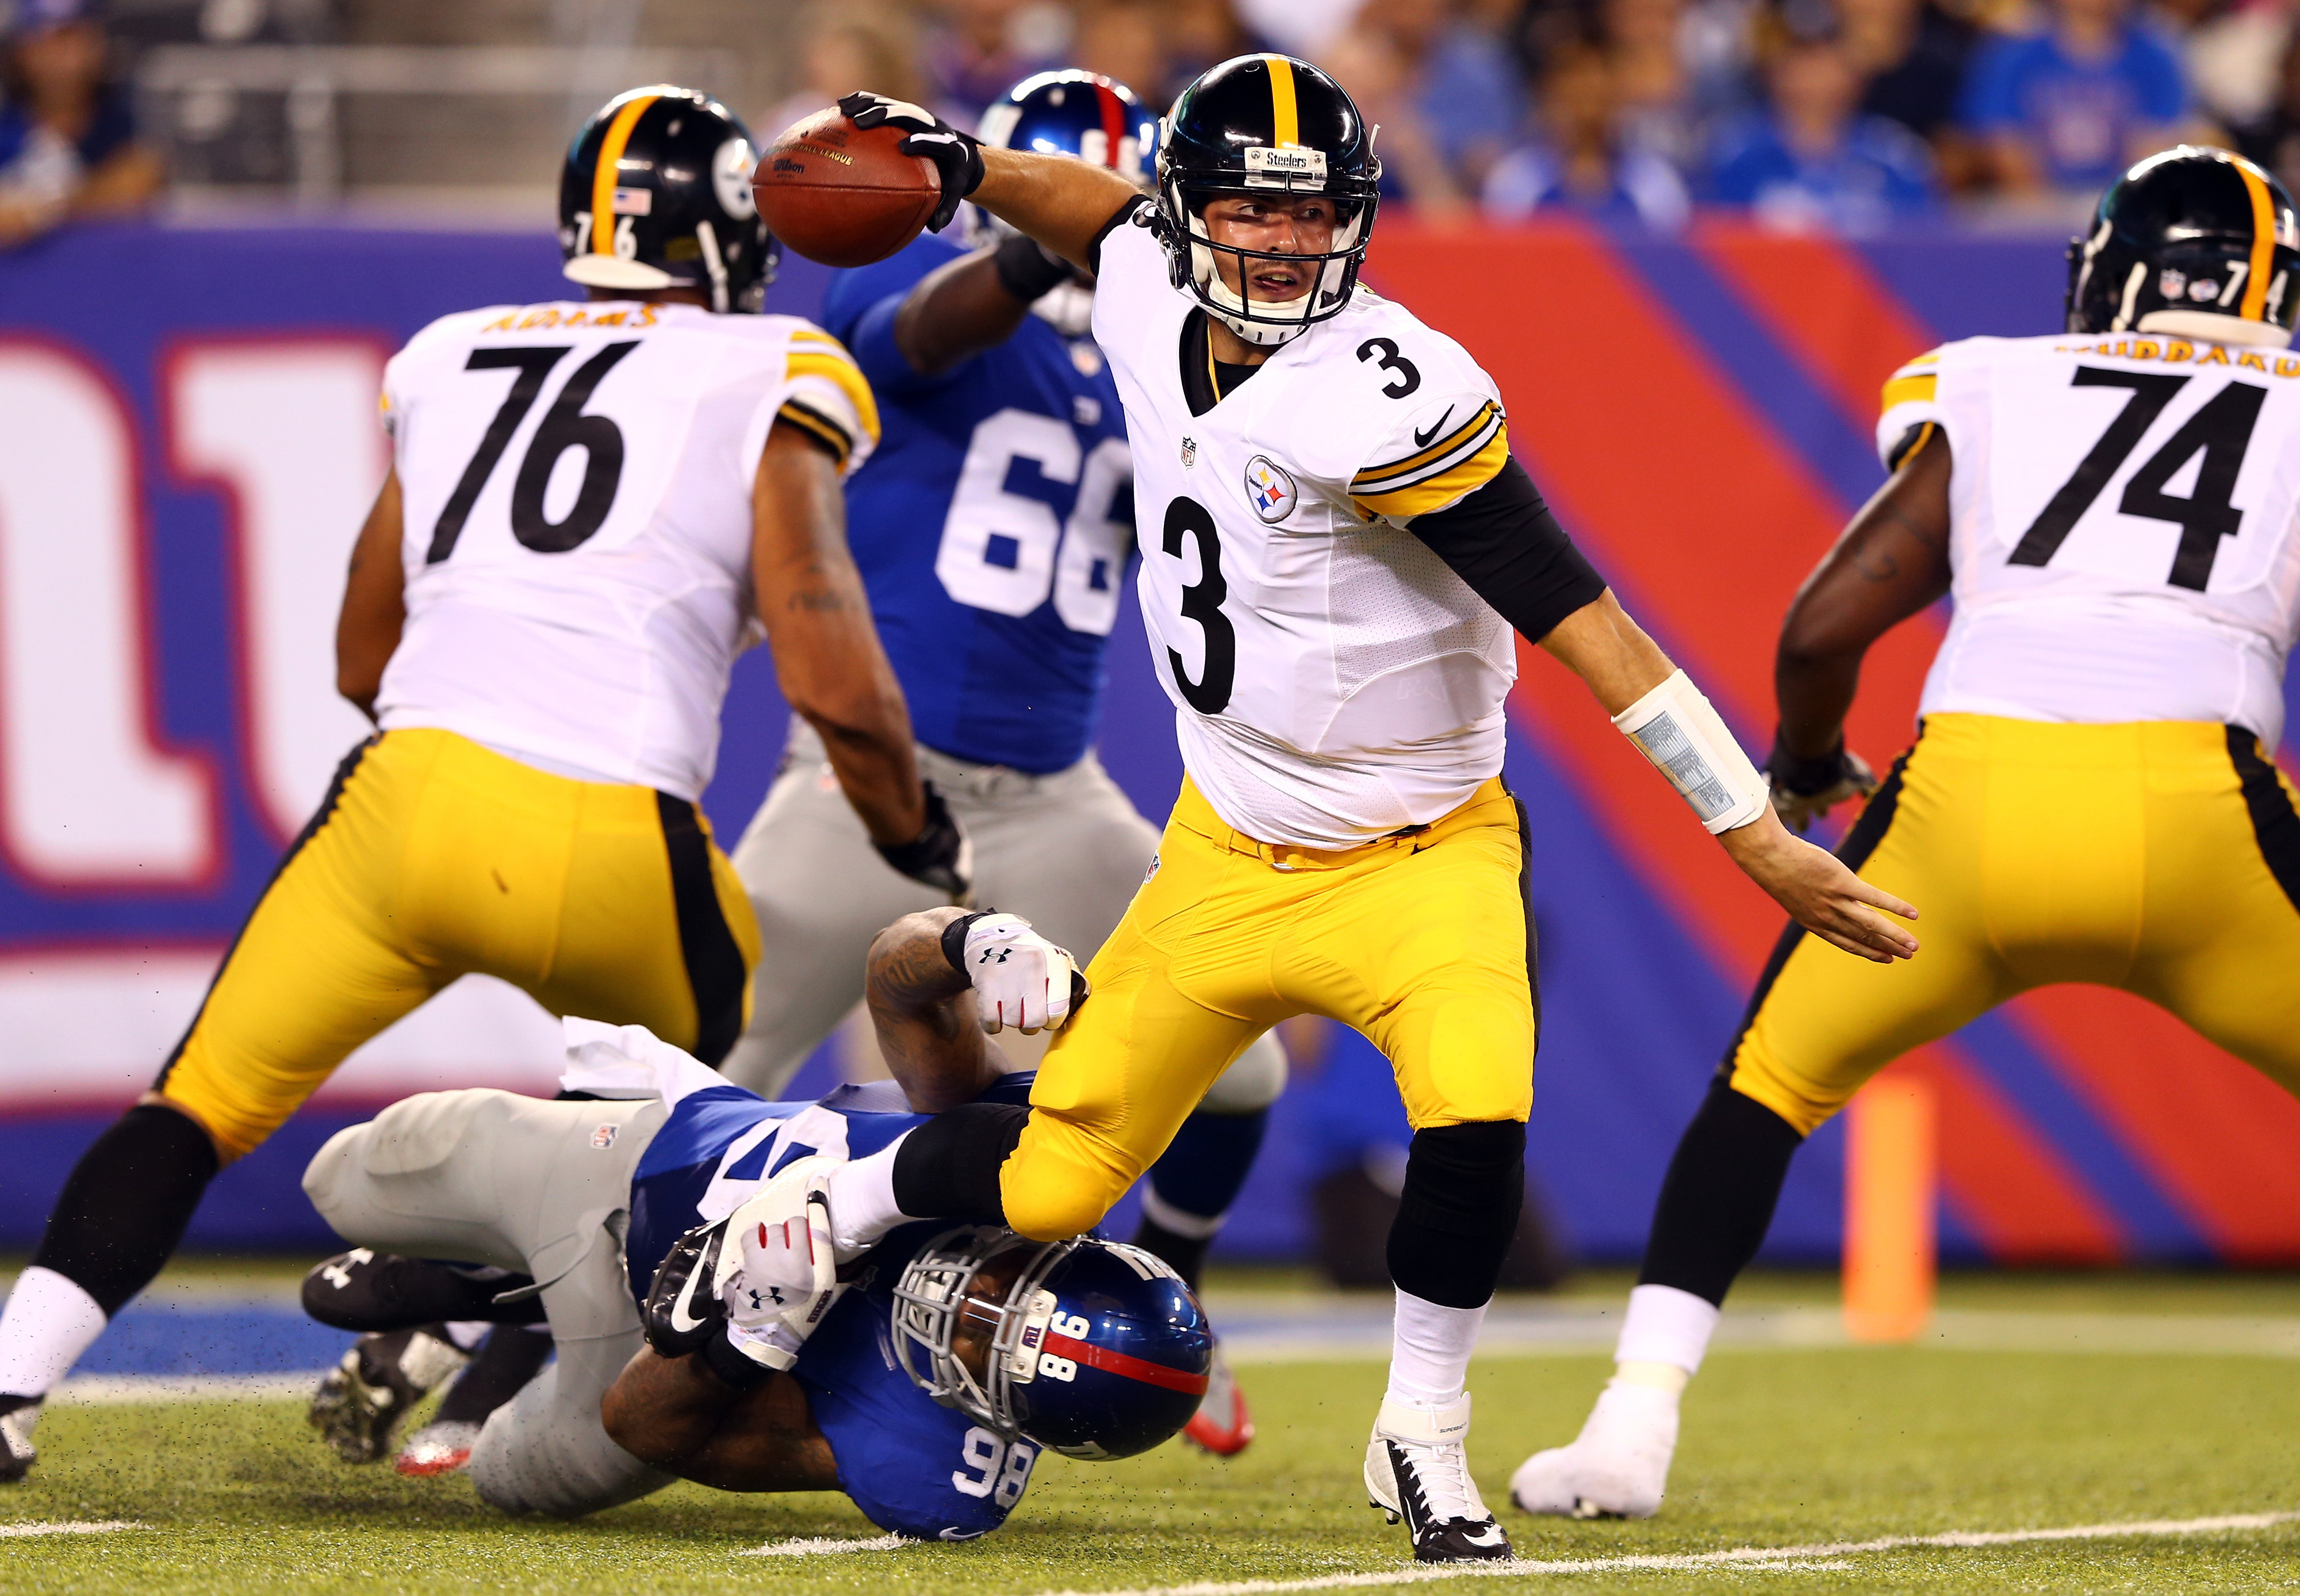 Damontre Moore pressures Landry Jones into an incompletion Saturday night